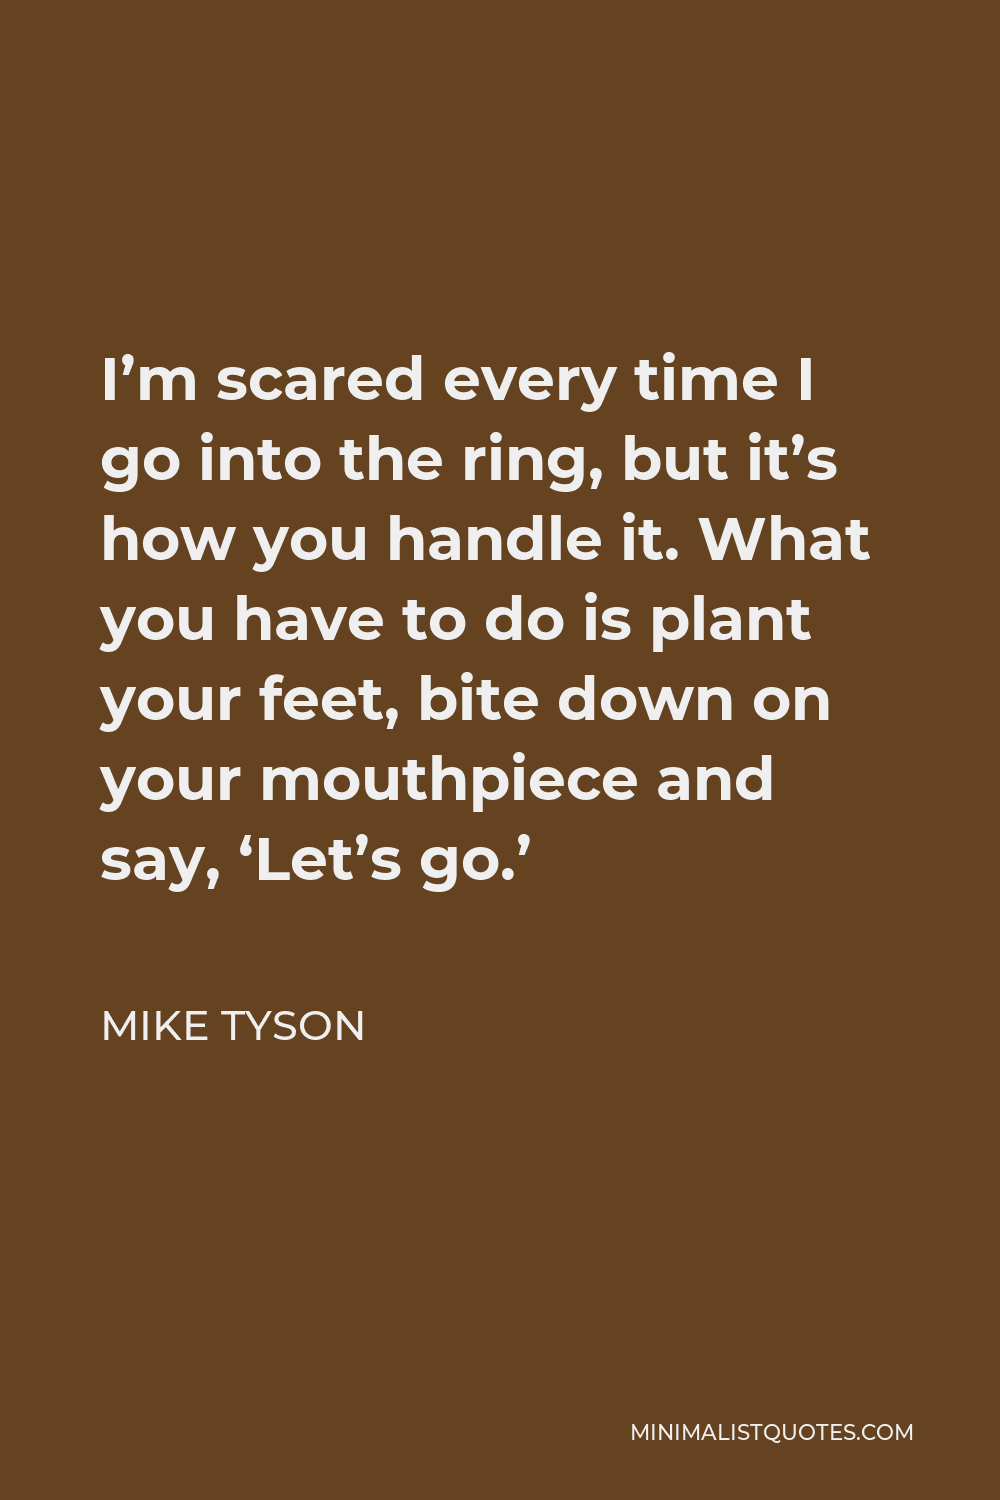 Mike Tyson Quote - I’m scared every time I go into the ring, but it’s how you handle it. What you have to do is plant your feet, bite down on your mouthpiece and say, ‘Let’s go.’